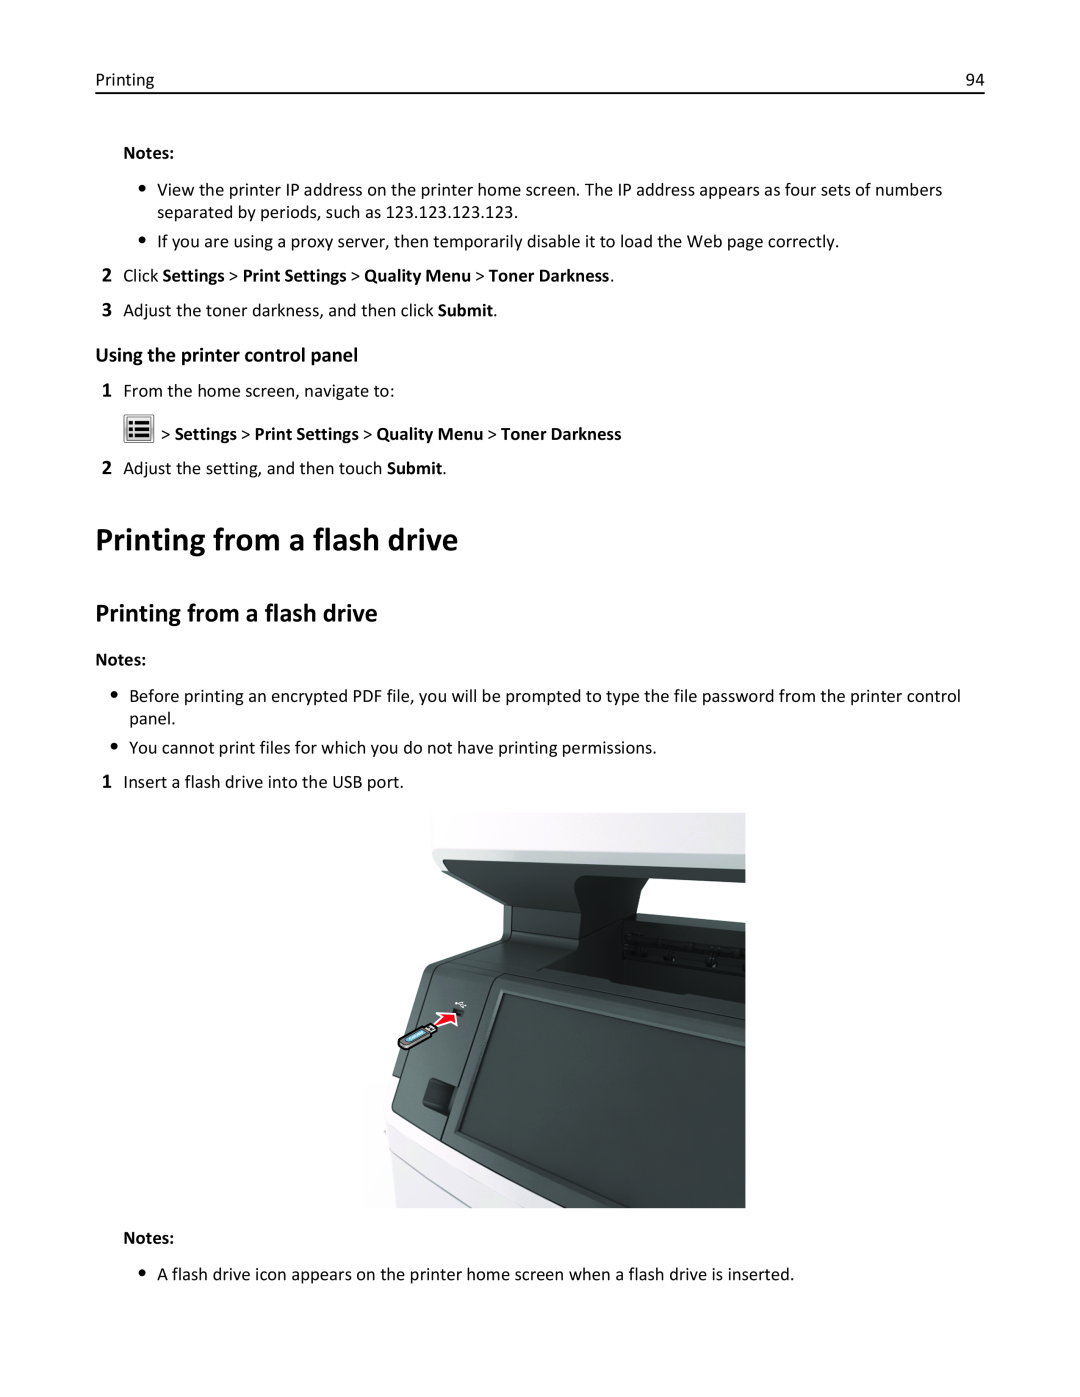 Lexmark 037, MX710DHE, 24T7310, 237 manual Printing from a flash drive, Using the printer control panel 